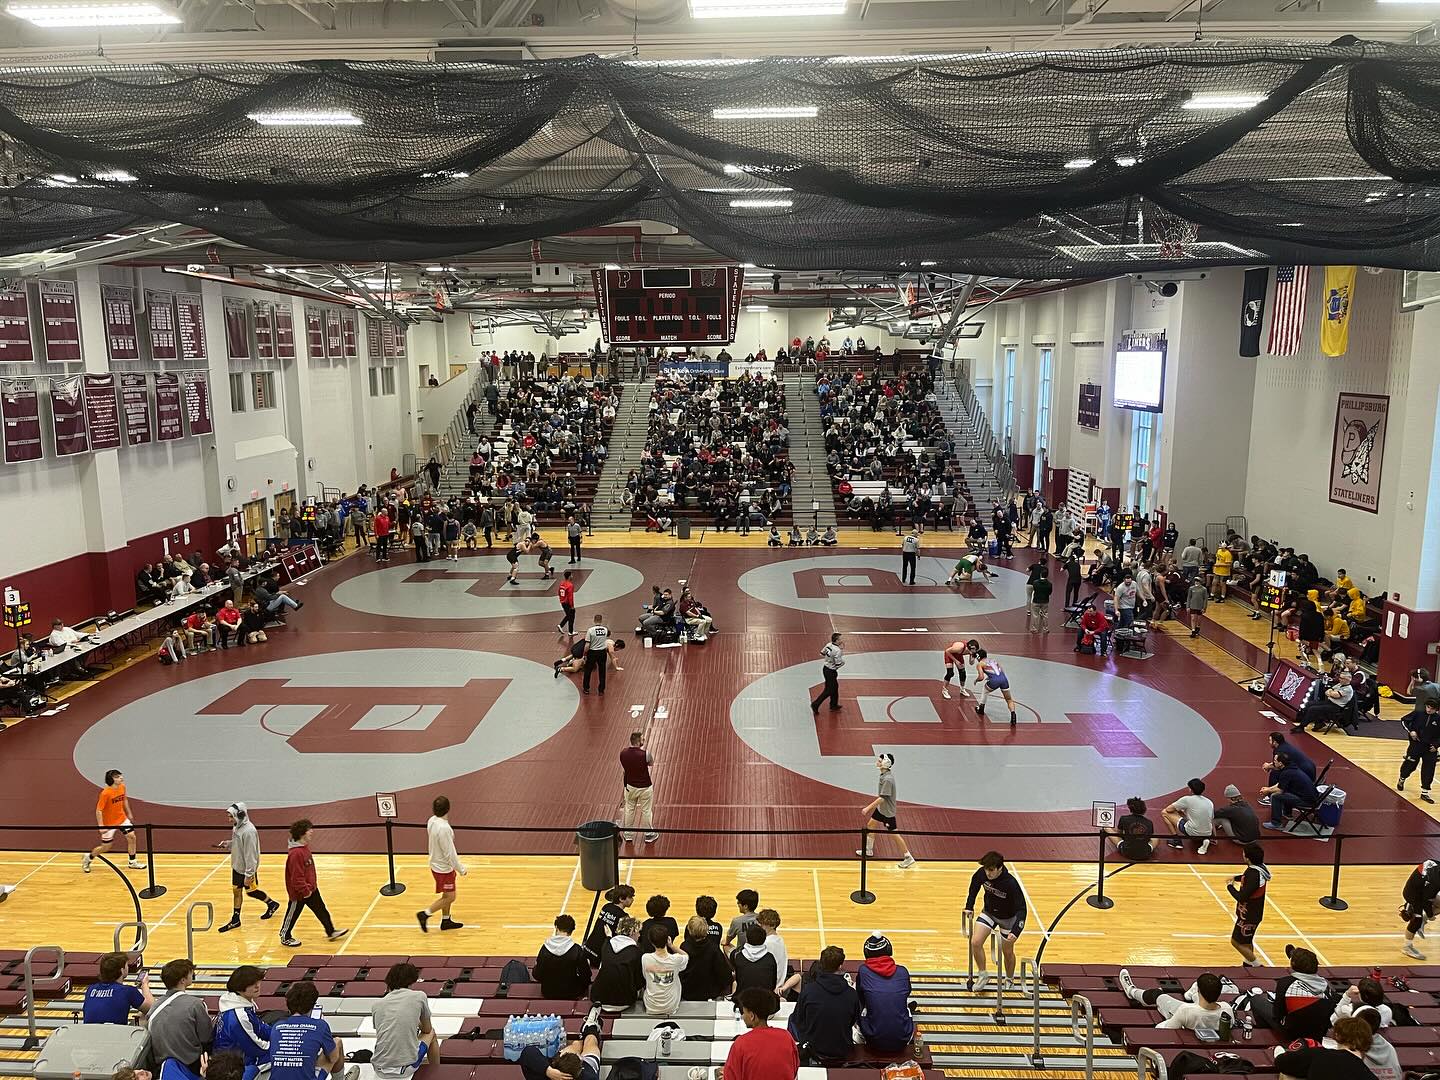 Hunterdon Central is crowned as the team winner for the H.W.S. tournament, 113lber Sherlock wins a barn burner, Phillipsburg goes 4-0 in the finals, North Warren’s James Dacunto gives the school its third title.